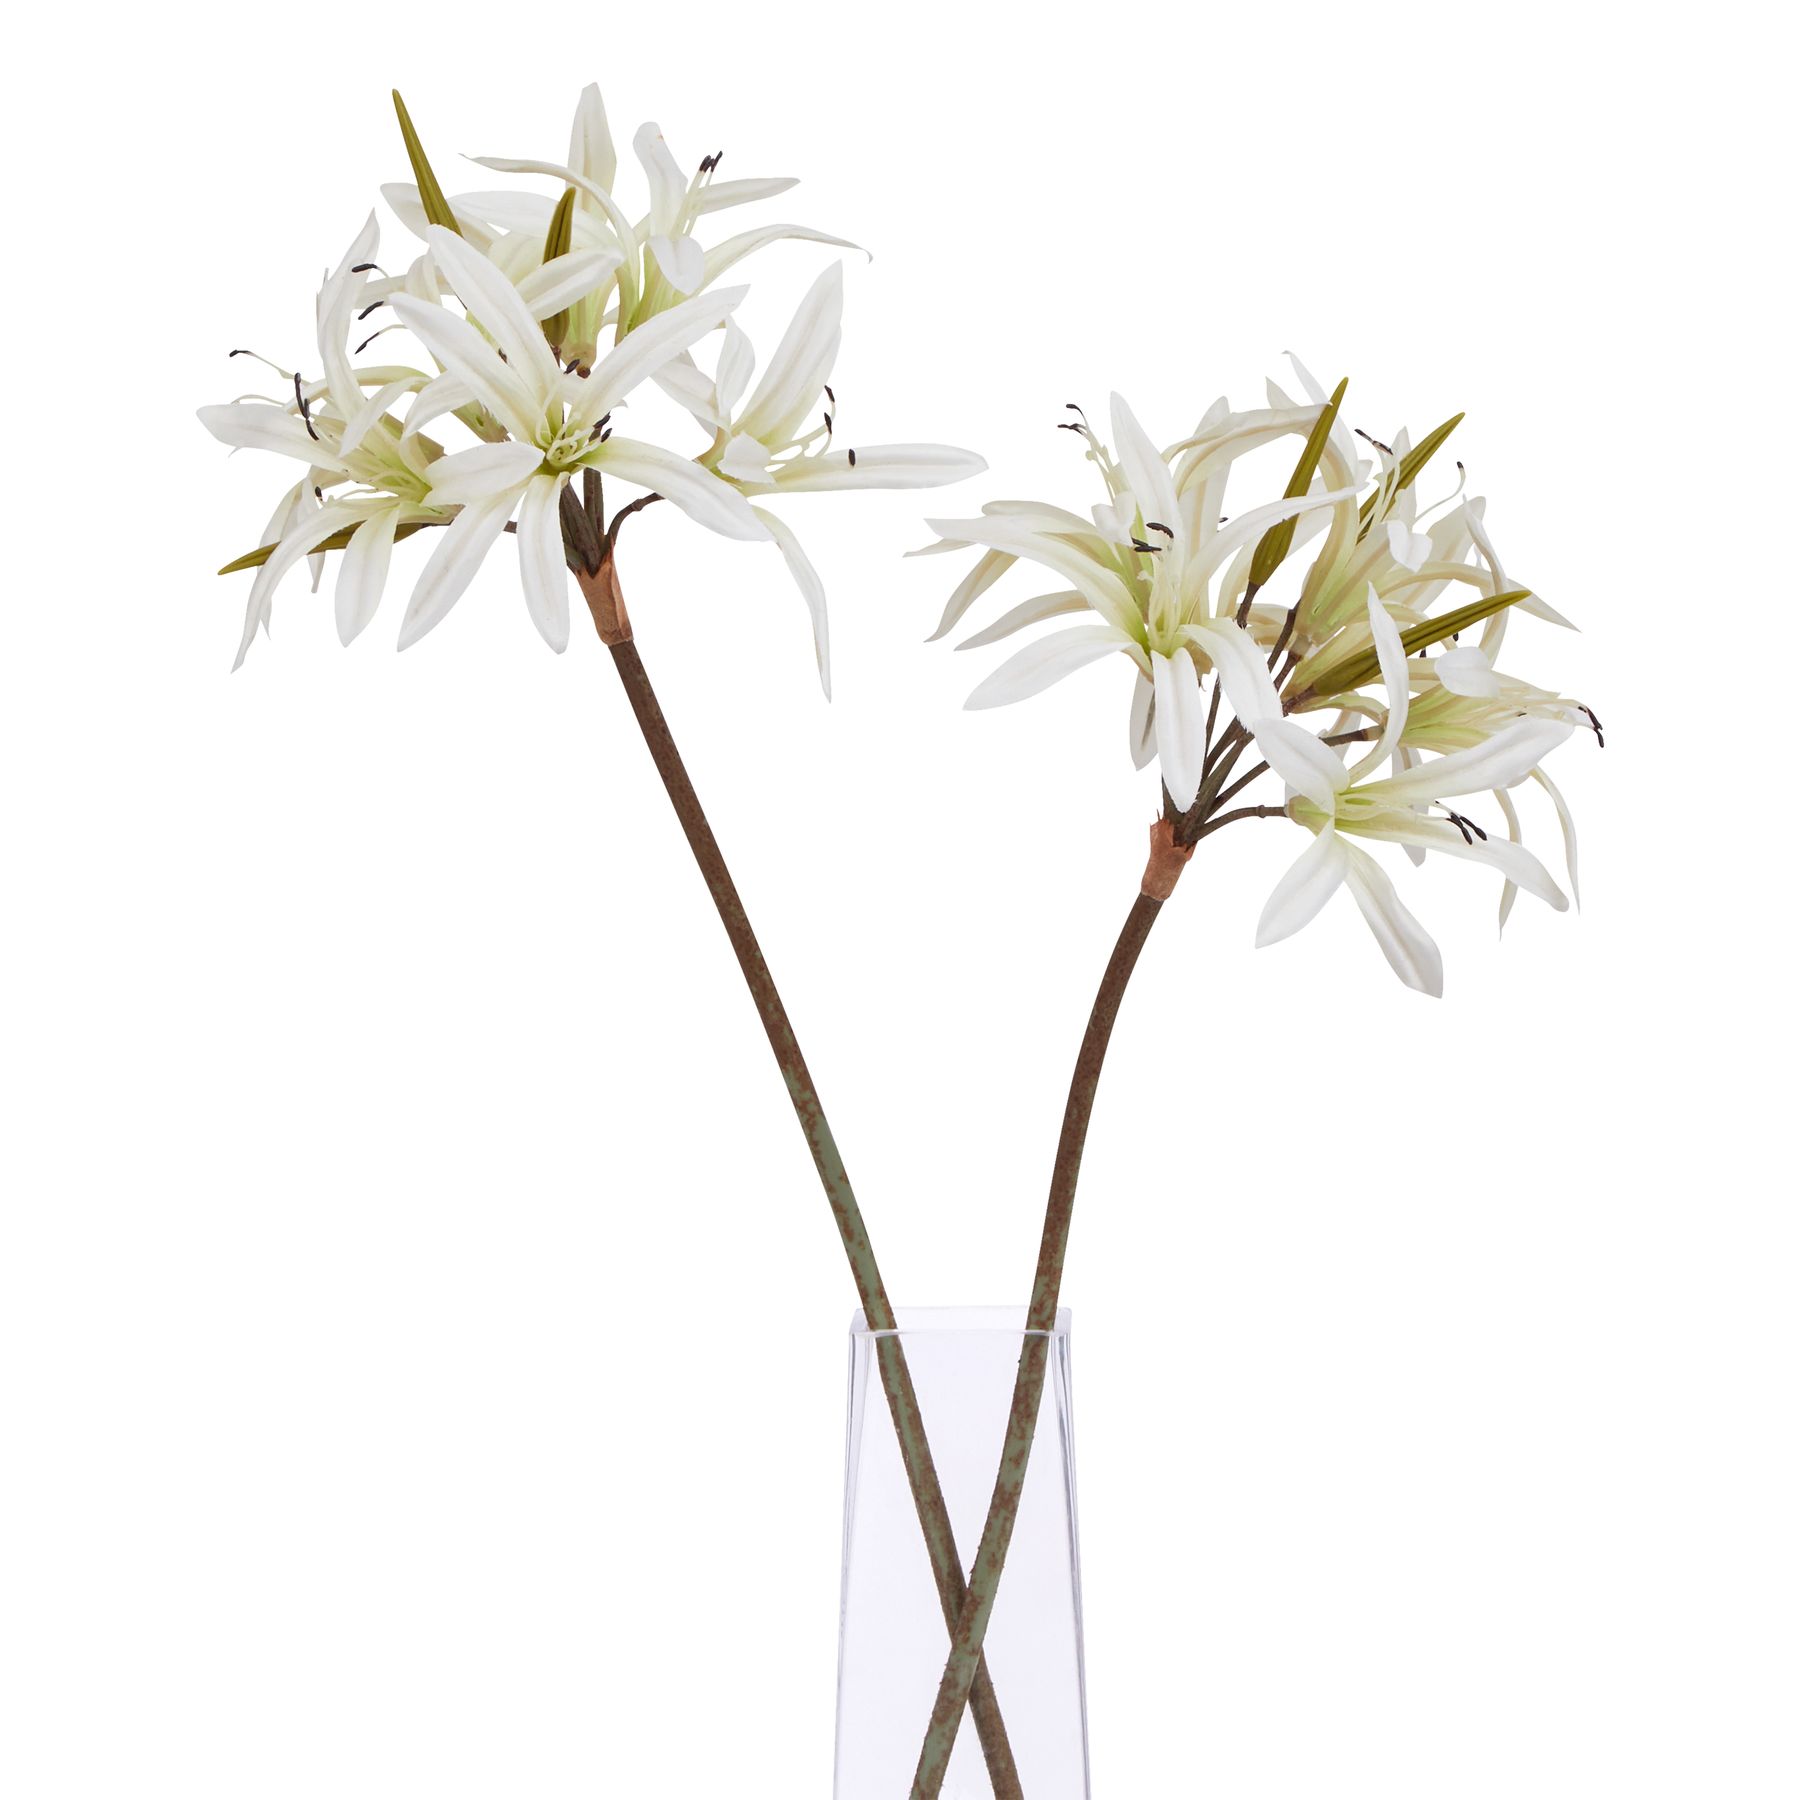 The Natural Garden Collection White Nerine Lily Stem - Image 3